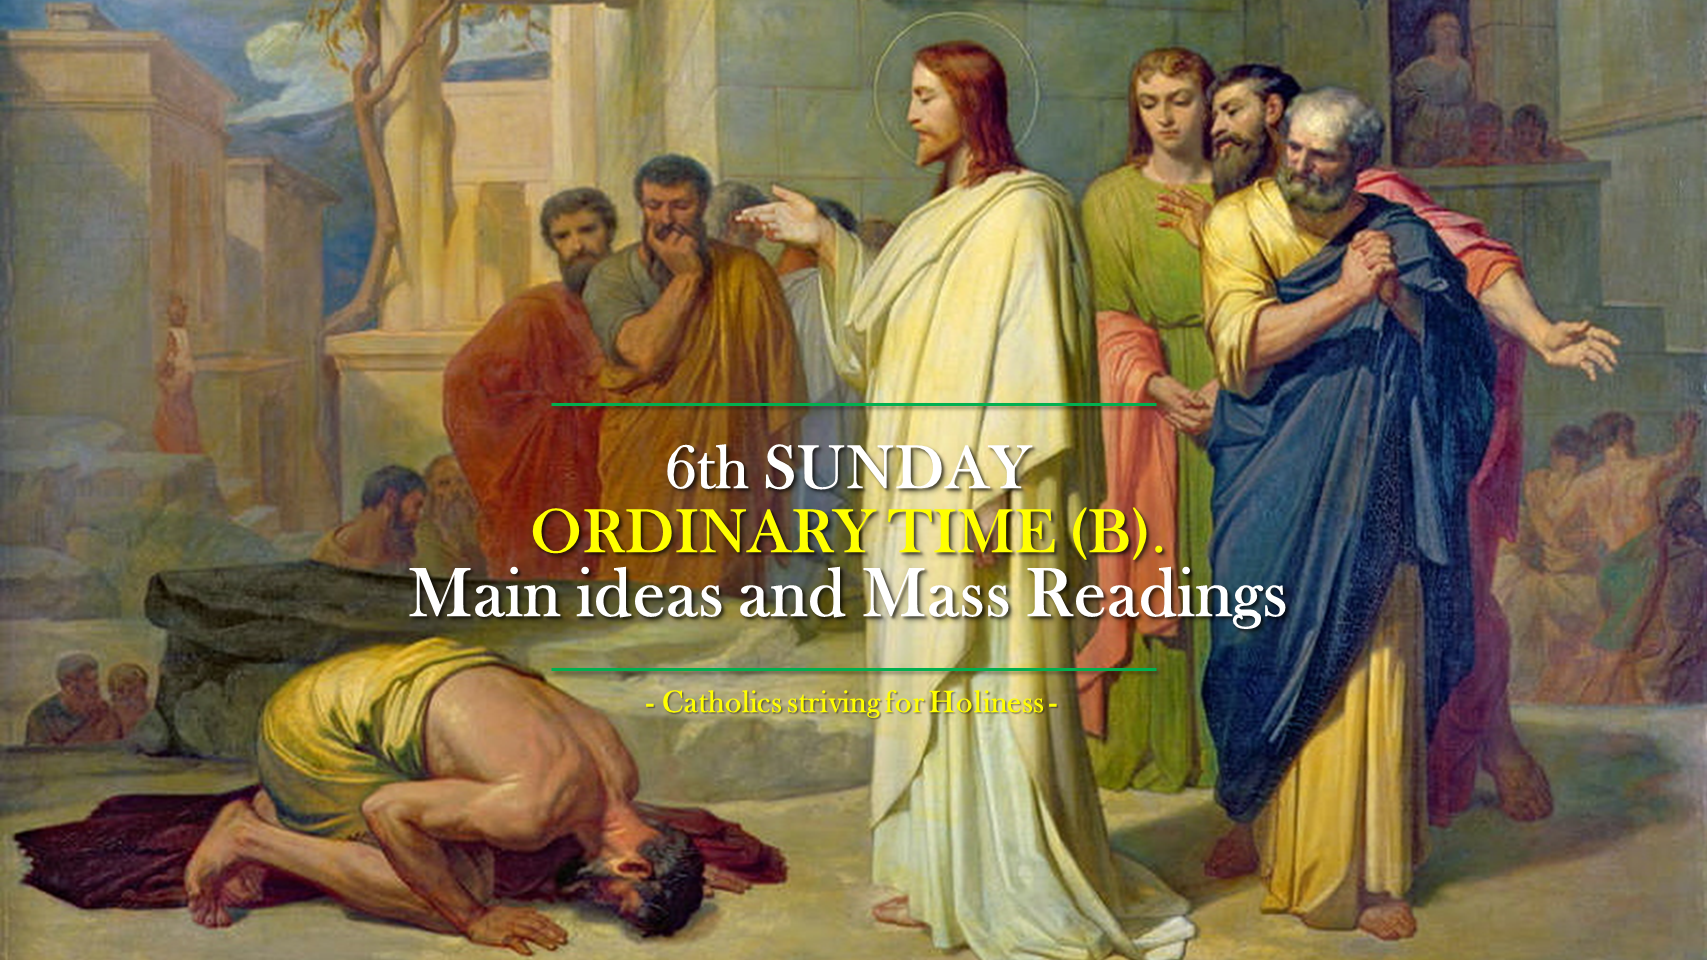 6th Sunday of Ordinary Time (B) MAIN IDEAS AND MASS READINGS. 5